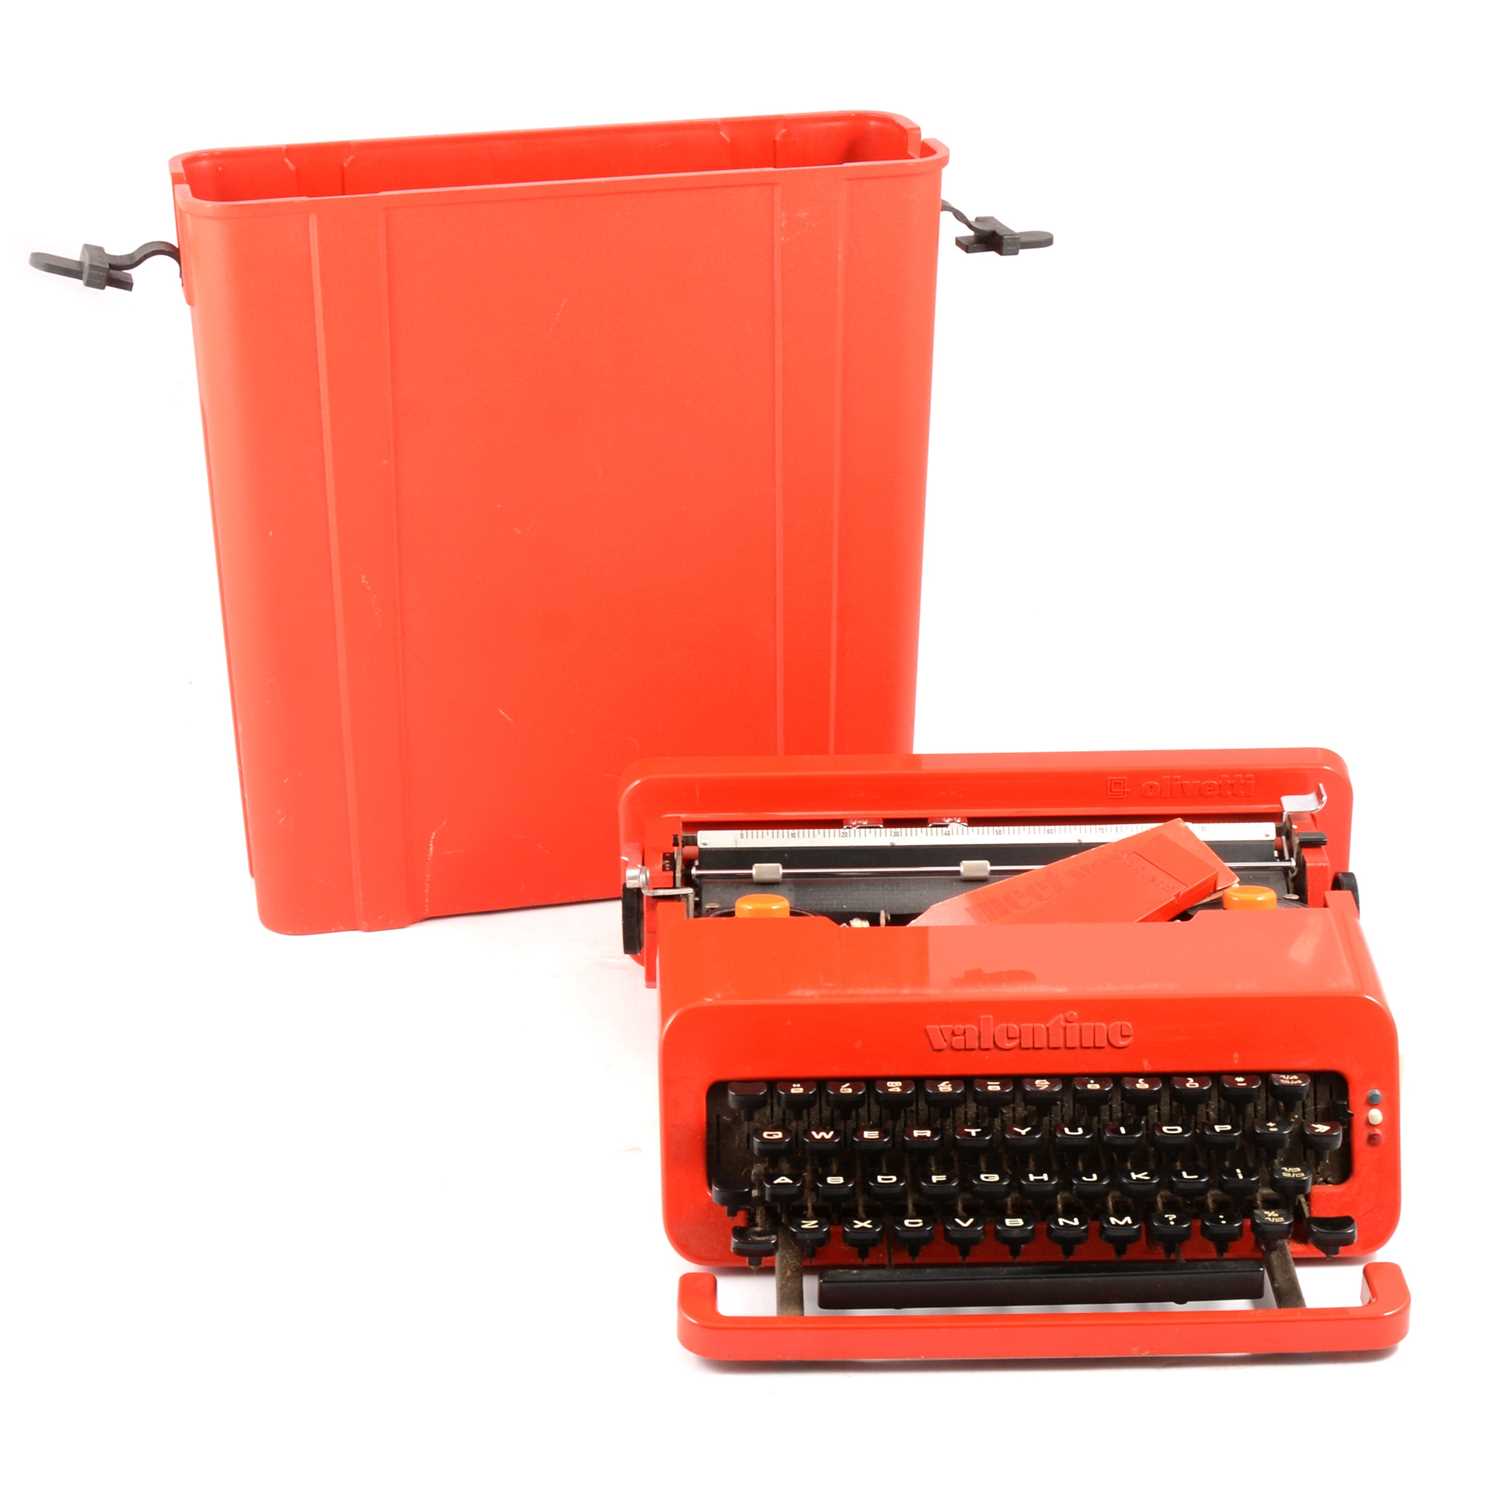 Lot 106 - Olivetti Valentine typewriter, designed by Ettore Sottsass and Perry King.